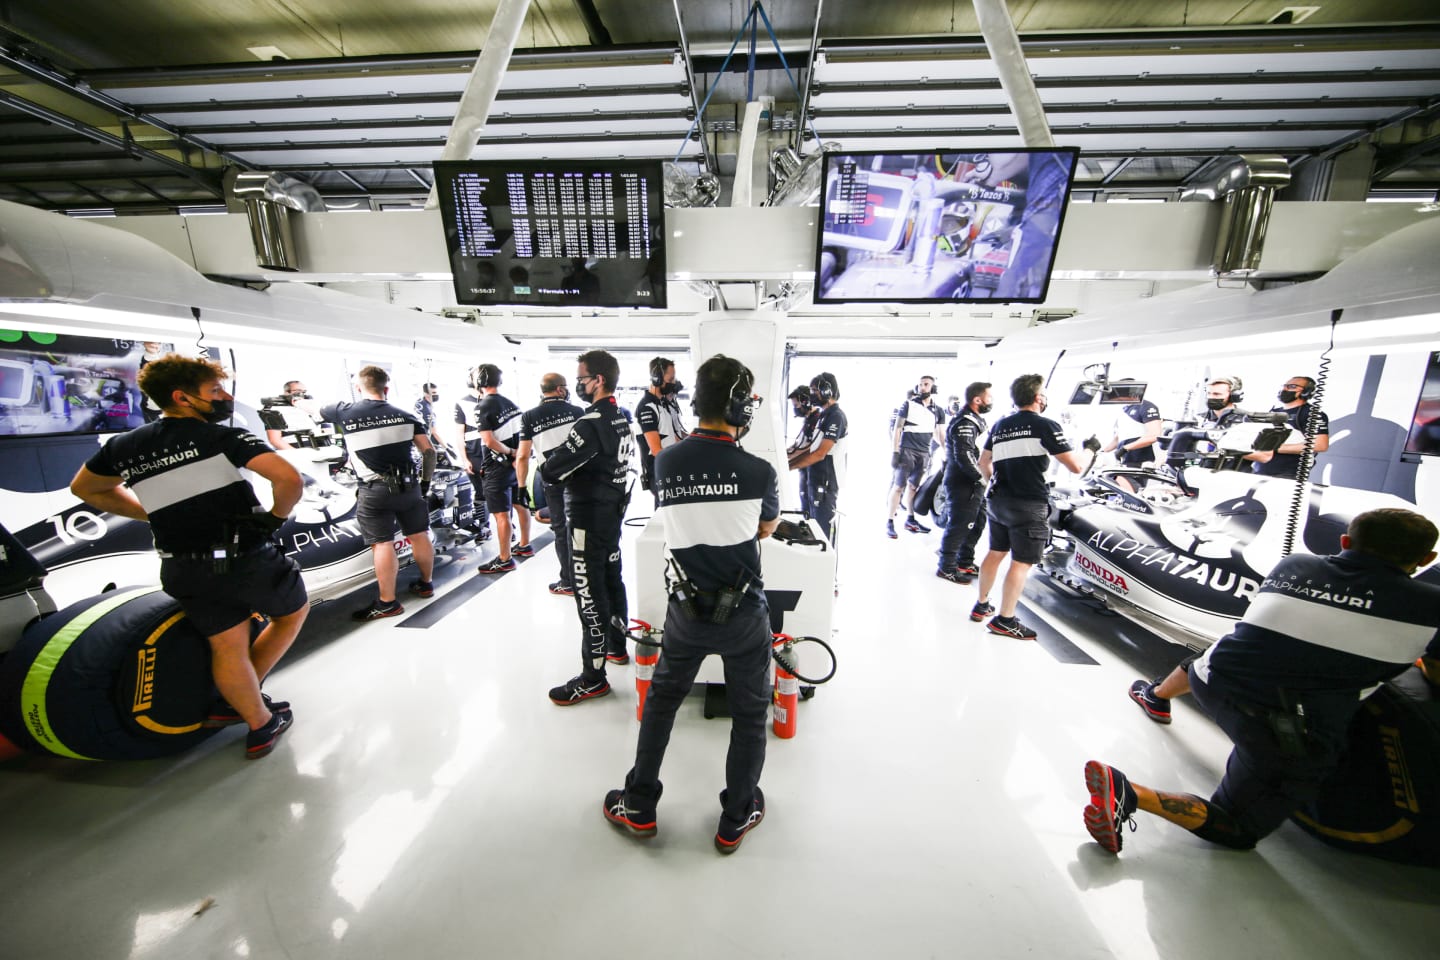 SPIELBERG, AUSTRIA - JULY 03: Scuderia AlphaTauri garage during qualifying ahead of the F1 Grand Prix of Austria at Red Bull Ring on July 03, 2021 in Spielberg, Austria. (Photo by Peter Fox/Getty Images)